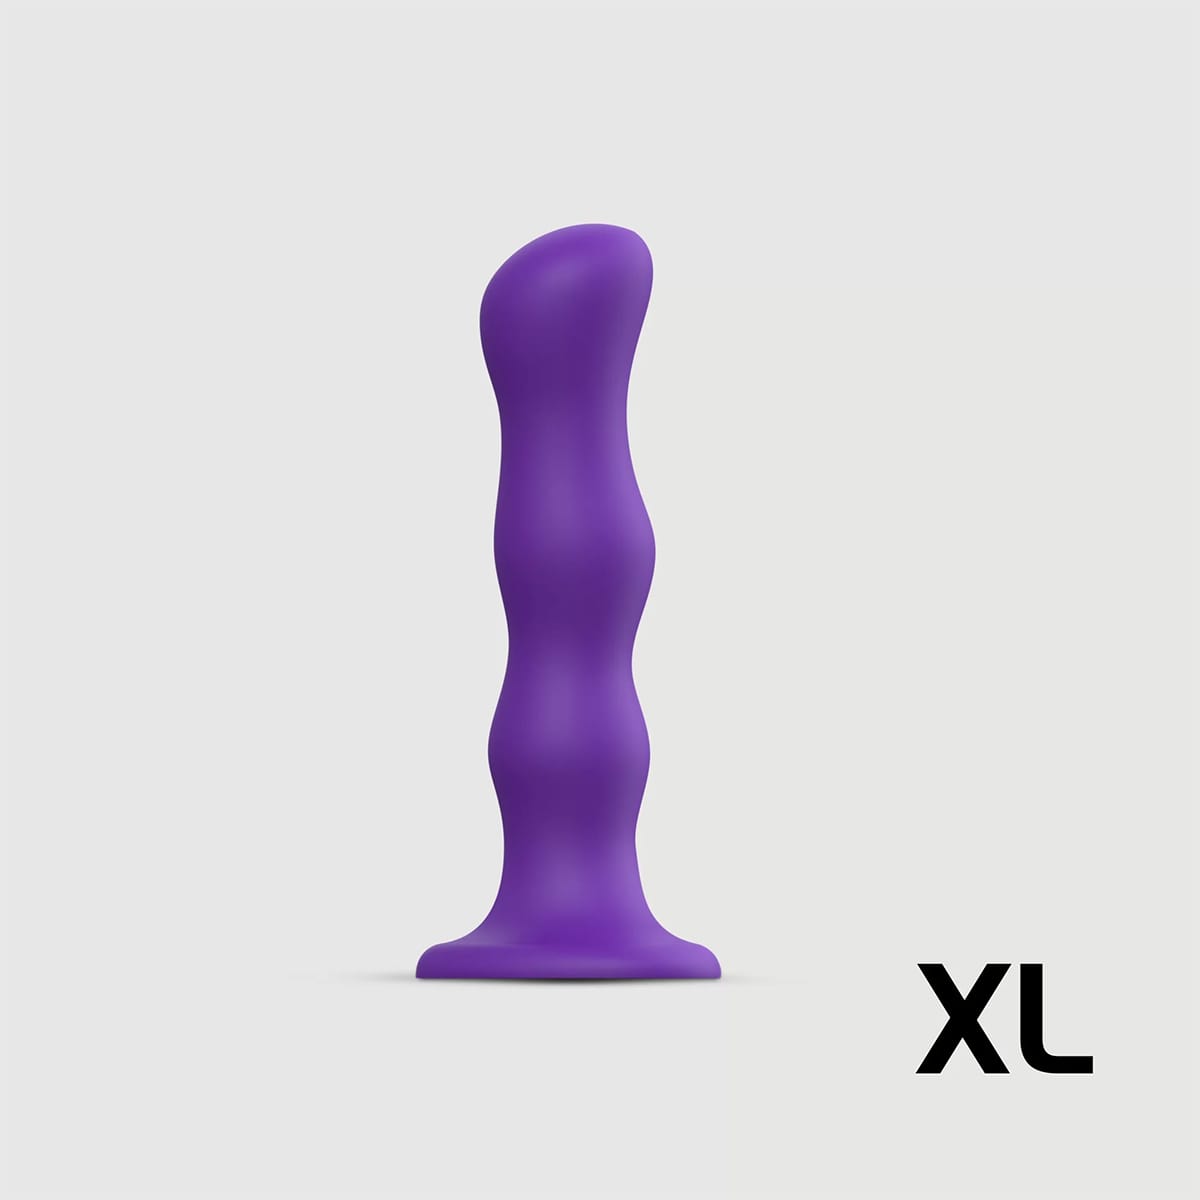 Buy Strap On Me Geisha Ball Dil XL   Purple  long and 1.65 thick dildo made by Strap-On-Me.